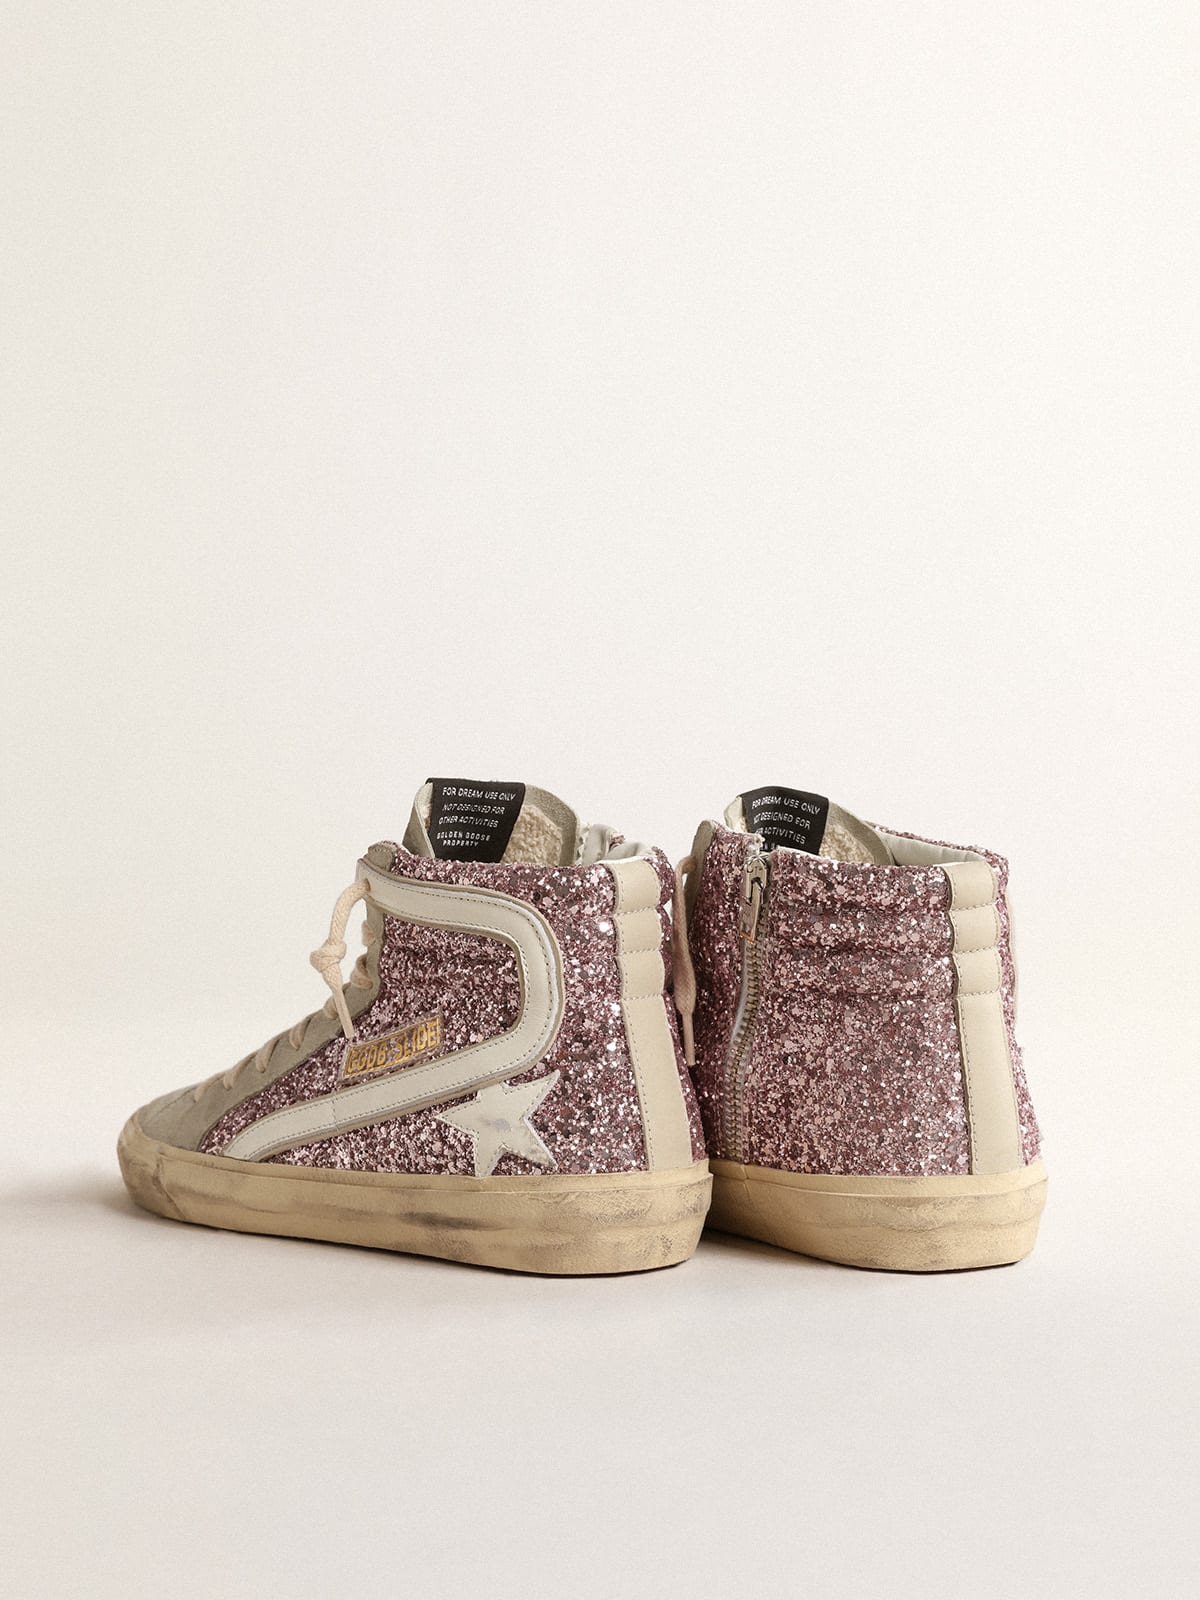 Golden Goose - Slide in lilac glitter with white leather star and flash in 